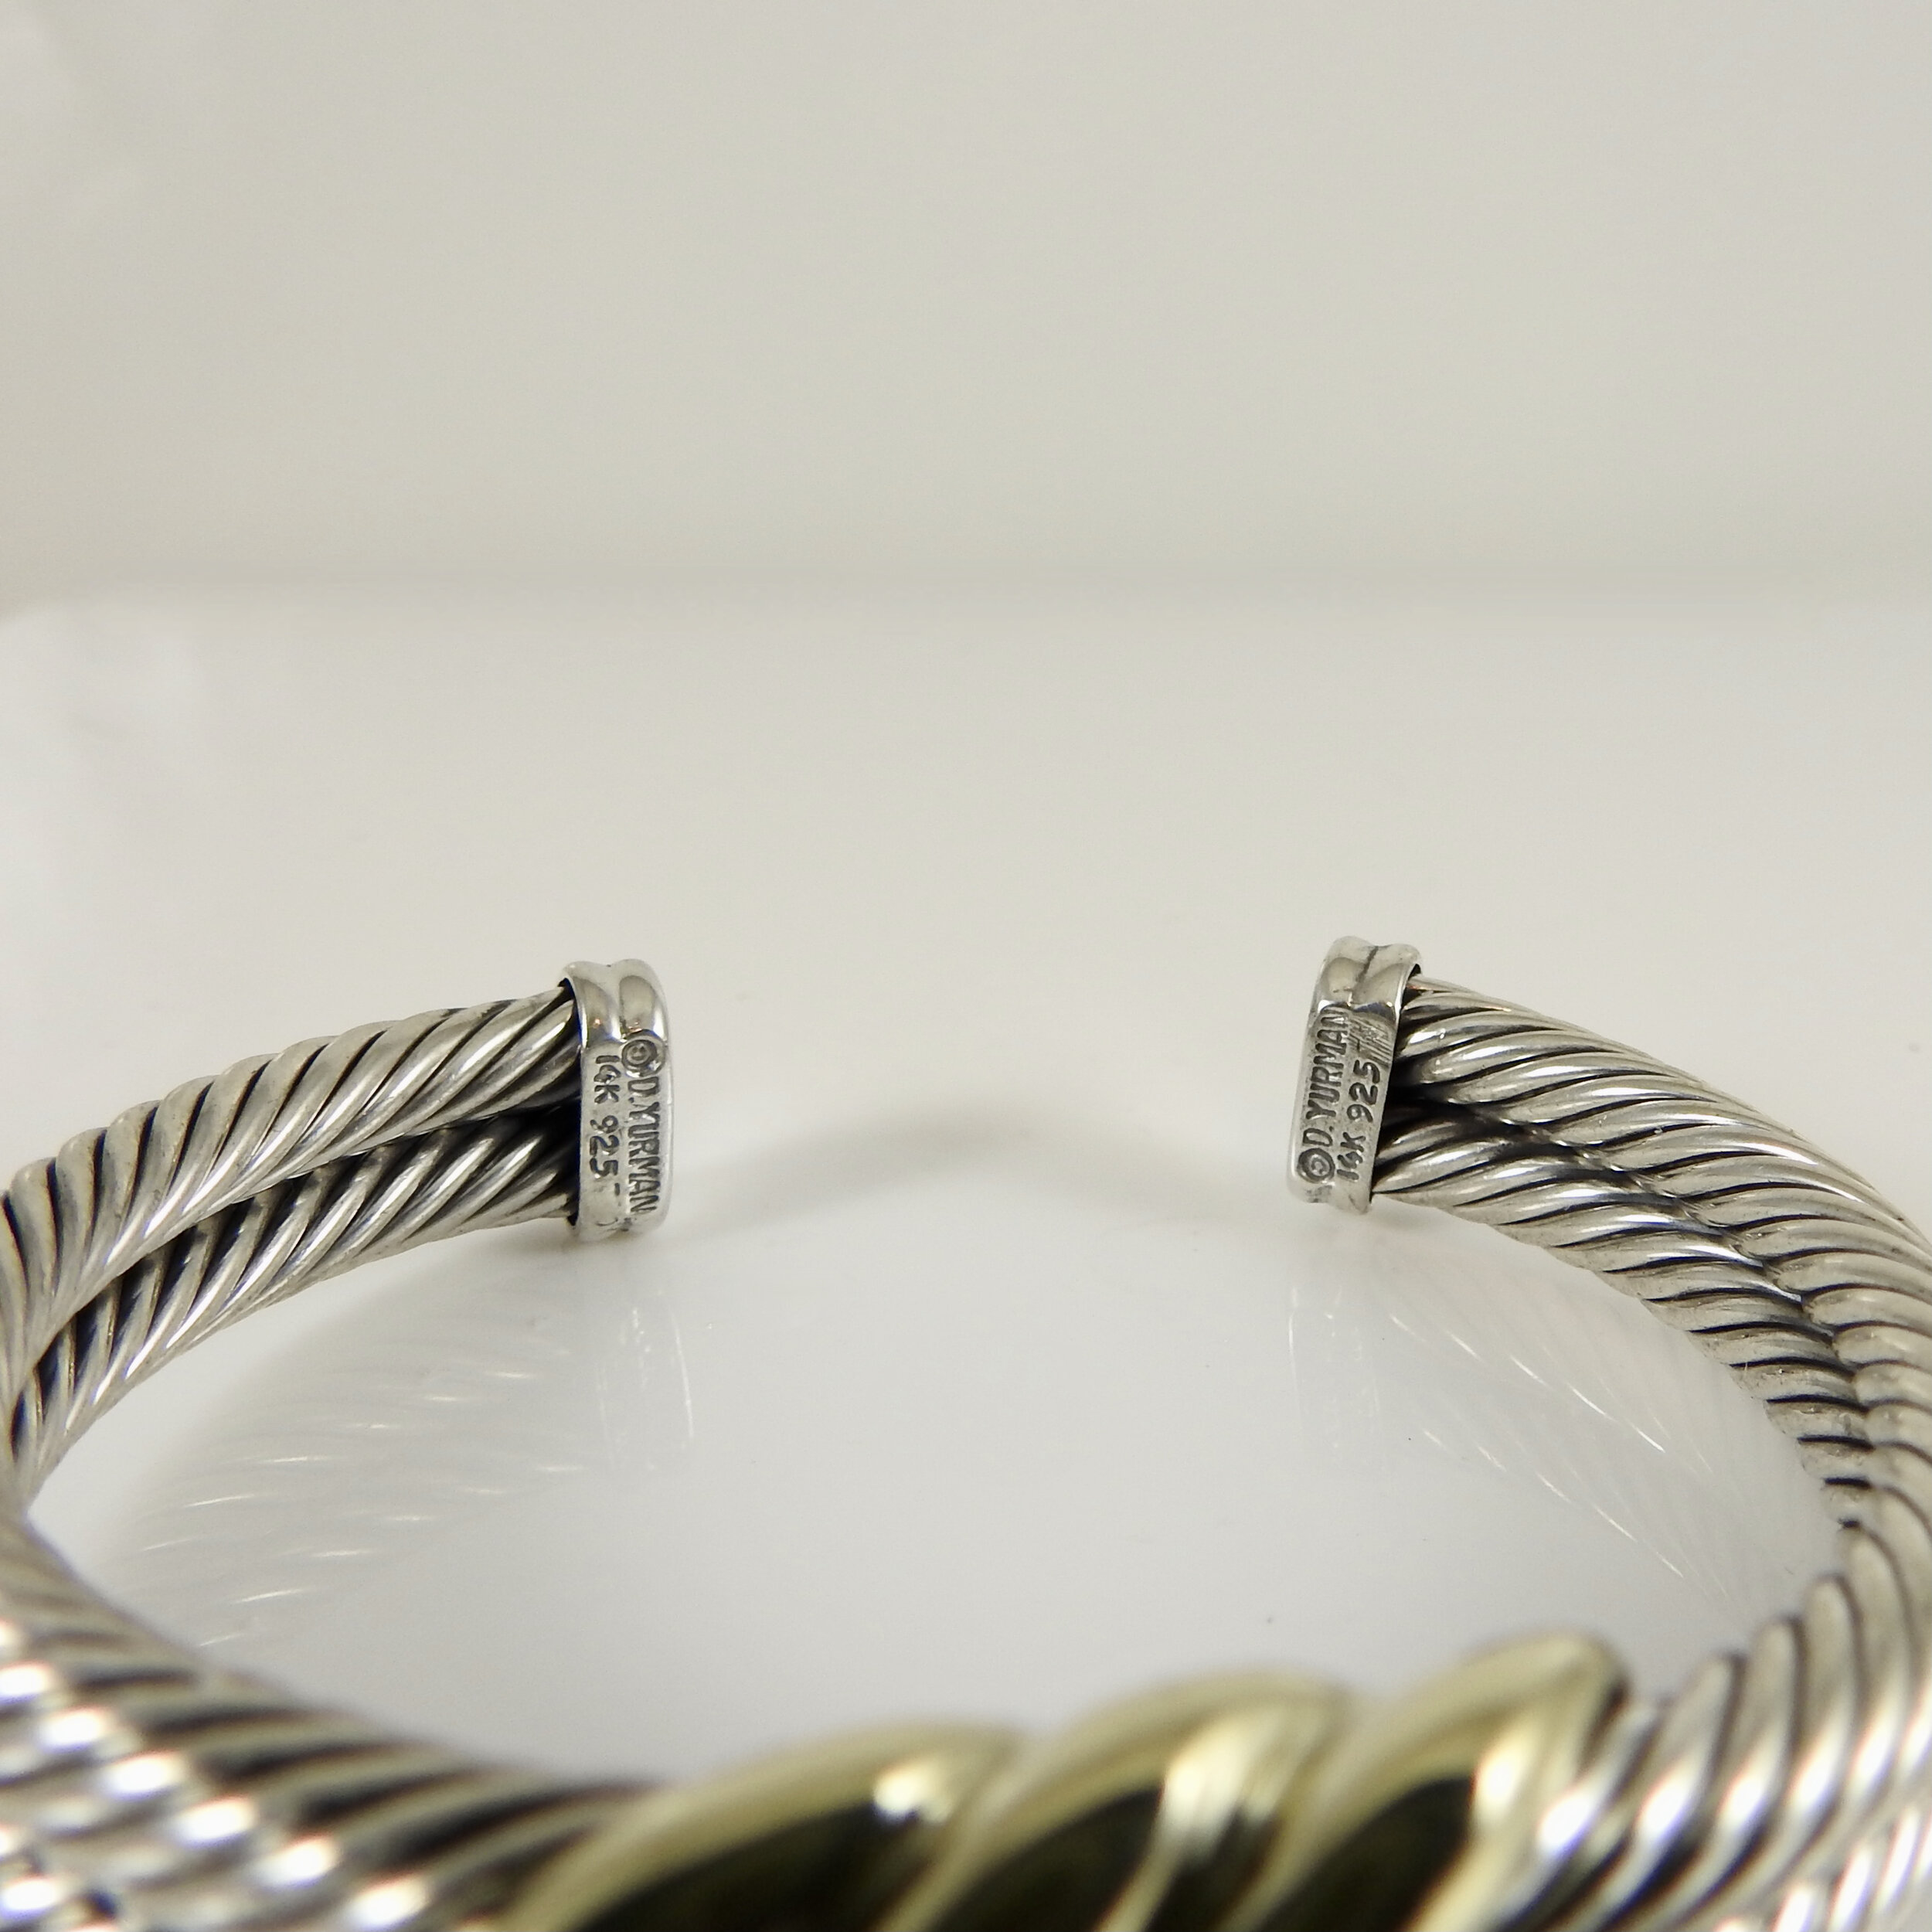 DAVID YURMAN Cable Buckle Bracelet  More Than You Can Imagine